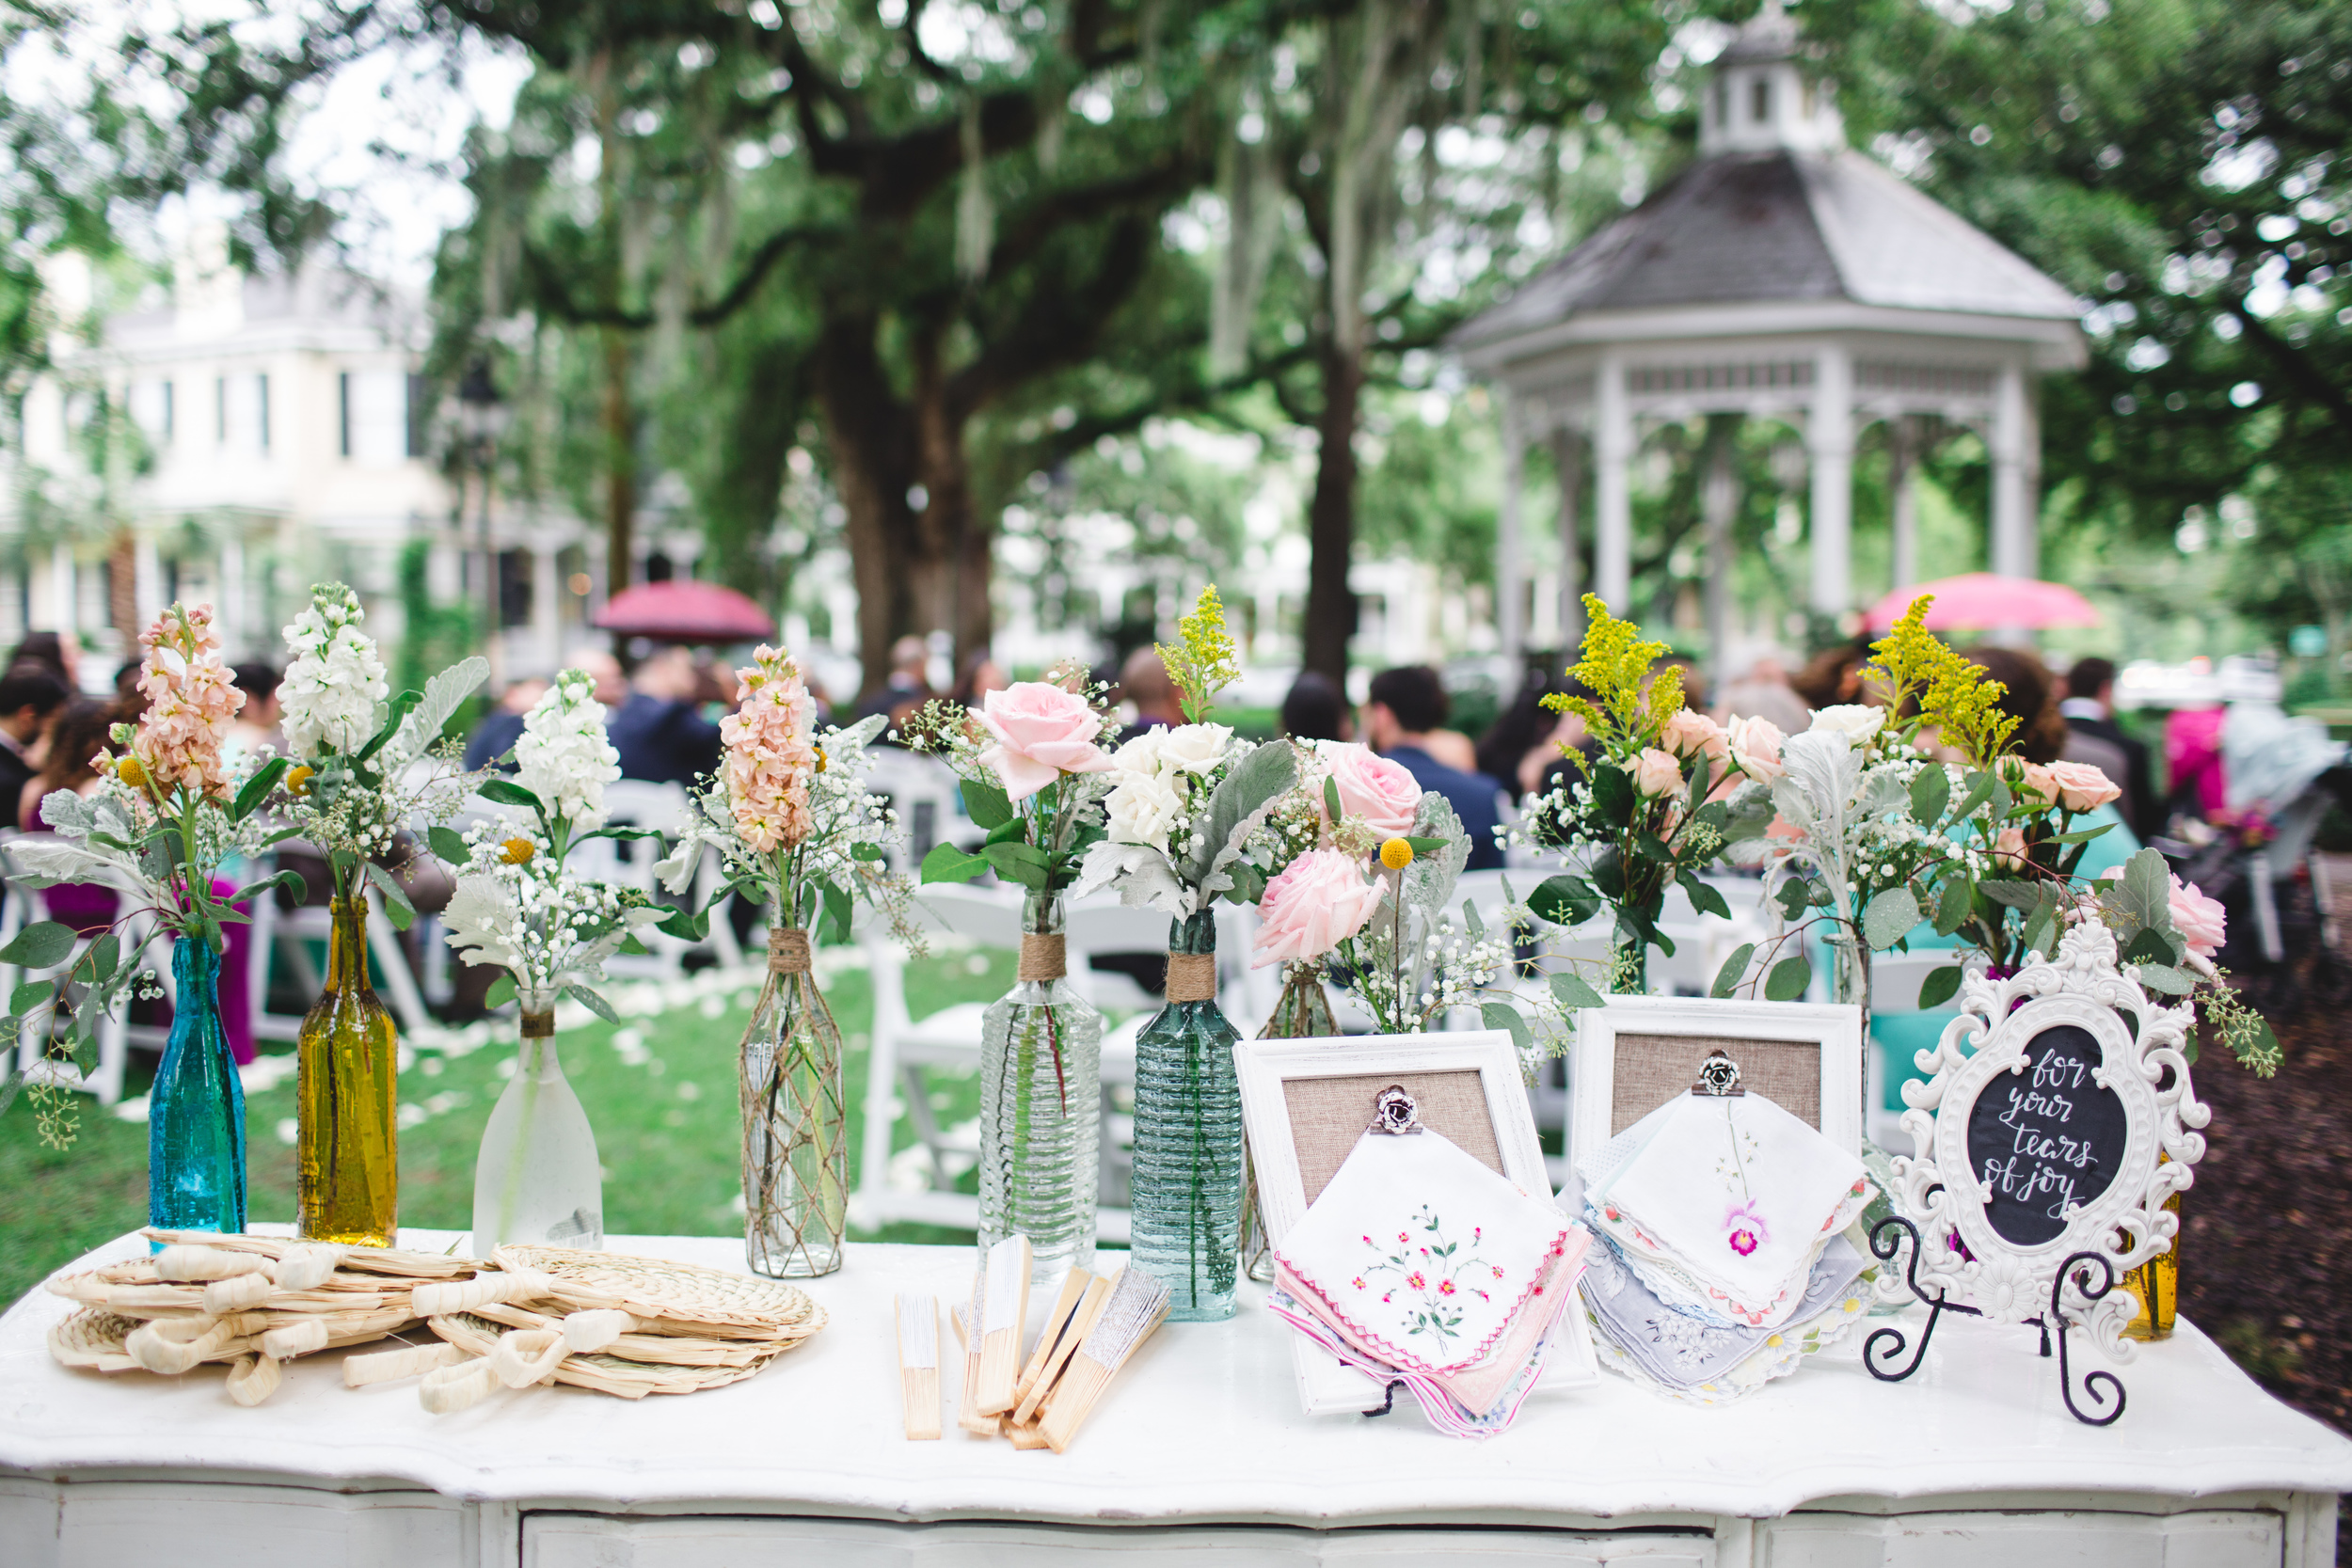 daniela-and-pedro-wedding-izzy-hudgins-photography-a-to-zinnias-whitfield-square-charles-h-morris-center-wedding-ivoyy-and-beau-bridal-boutique-dorie-hayley-paige-savannah-wedding-planner-savannah-bridal-boutique-savannah-weddings-21.jpg